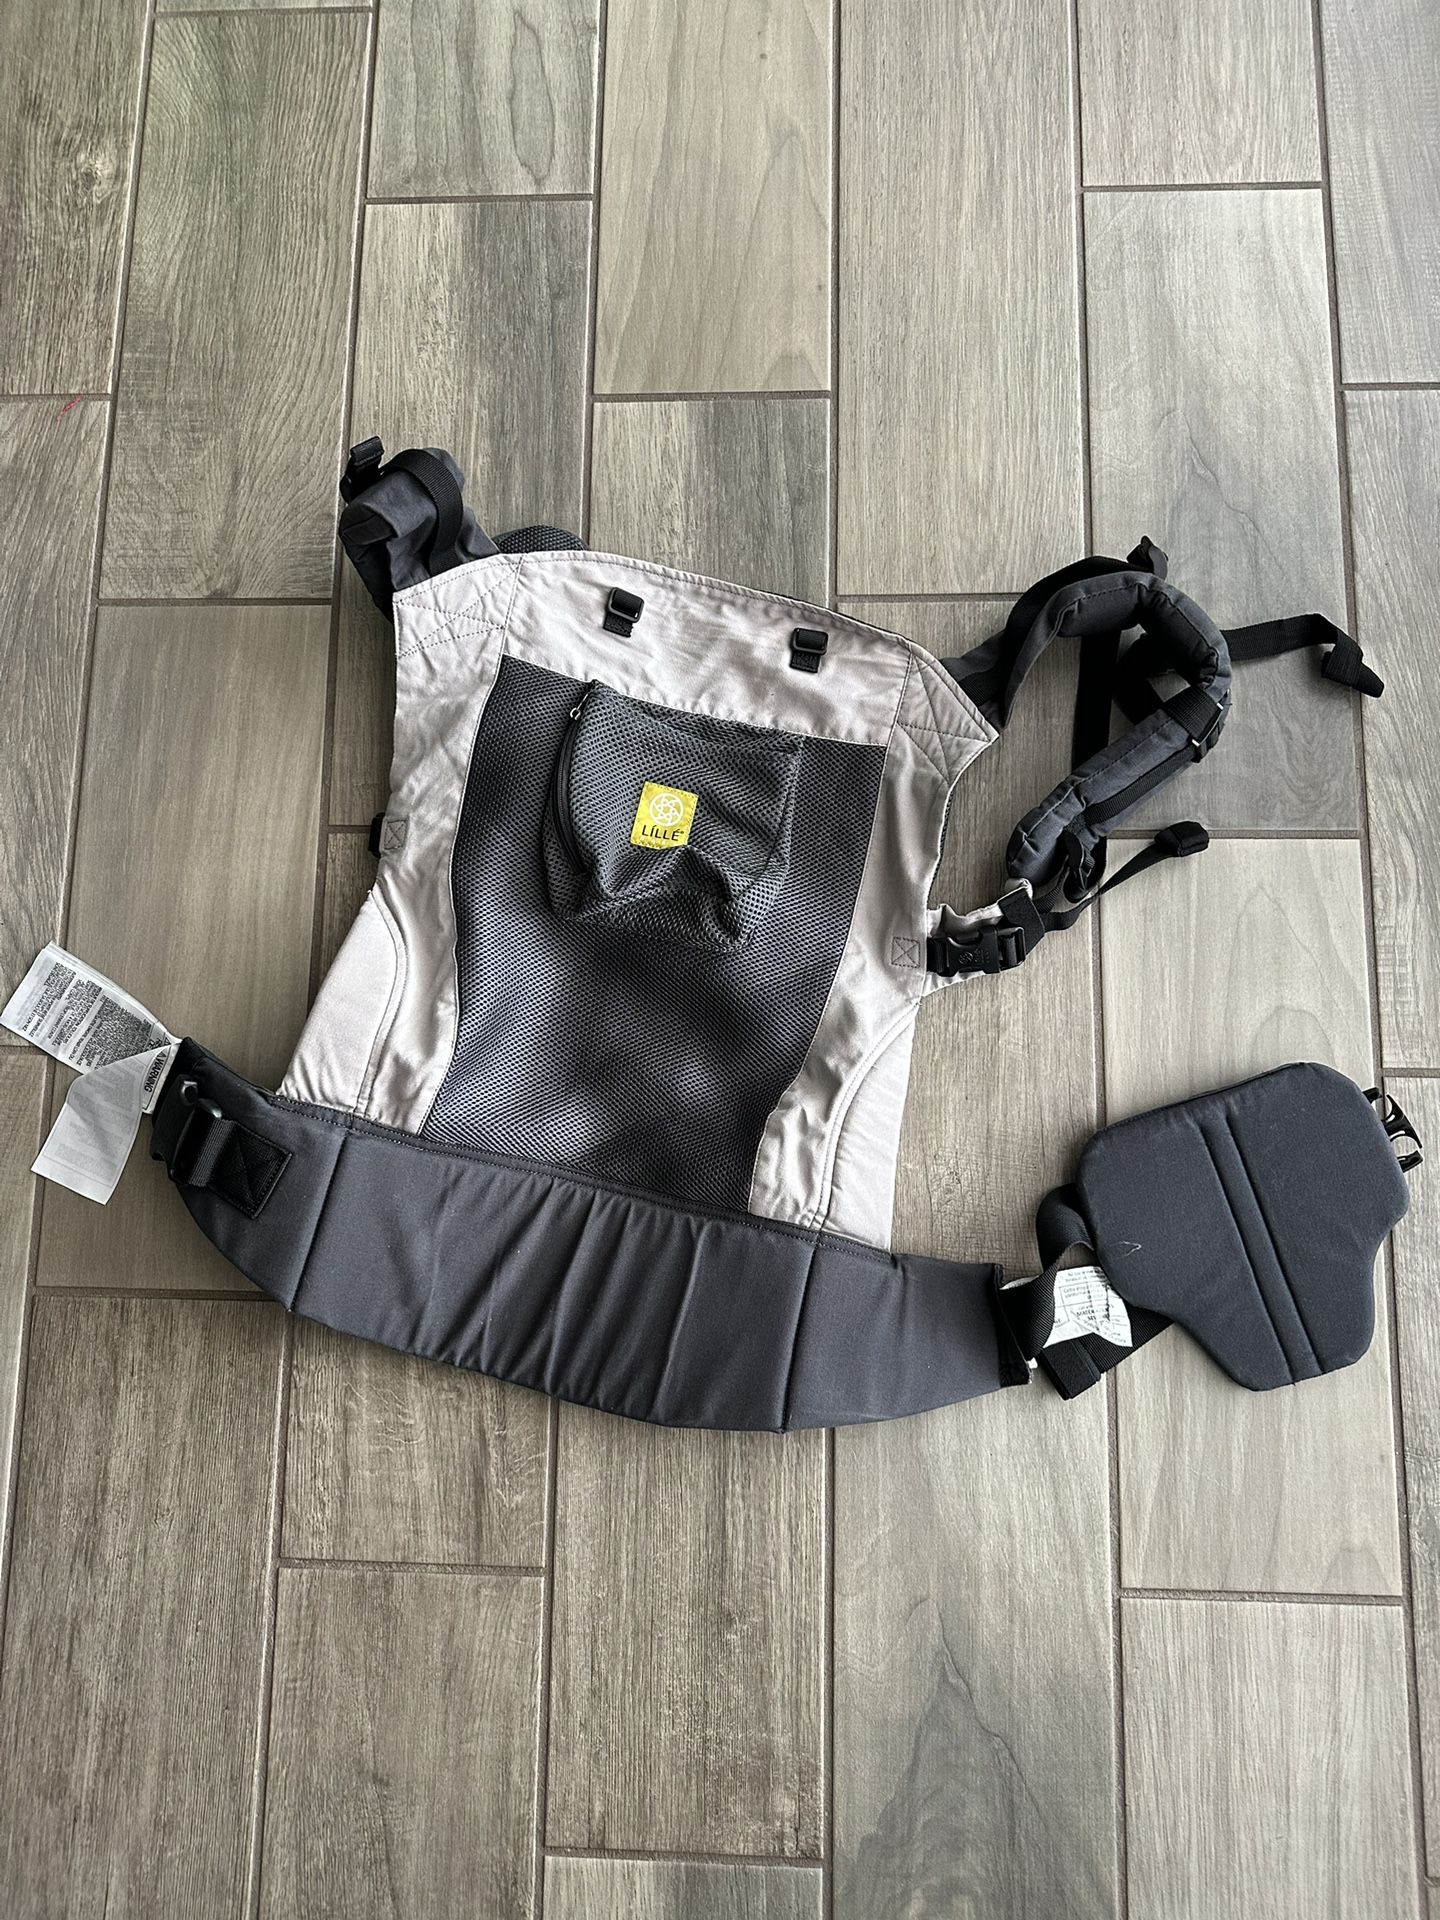 Lille Baby Carrier